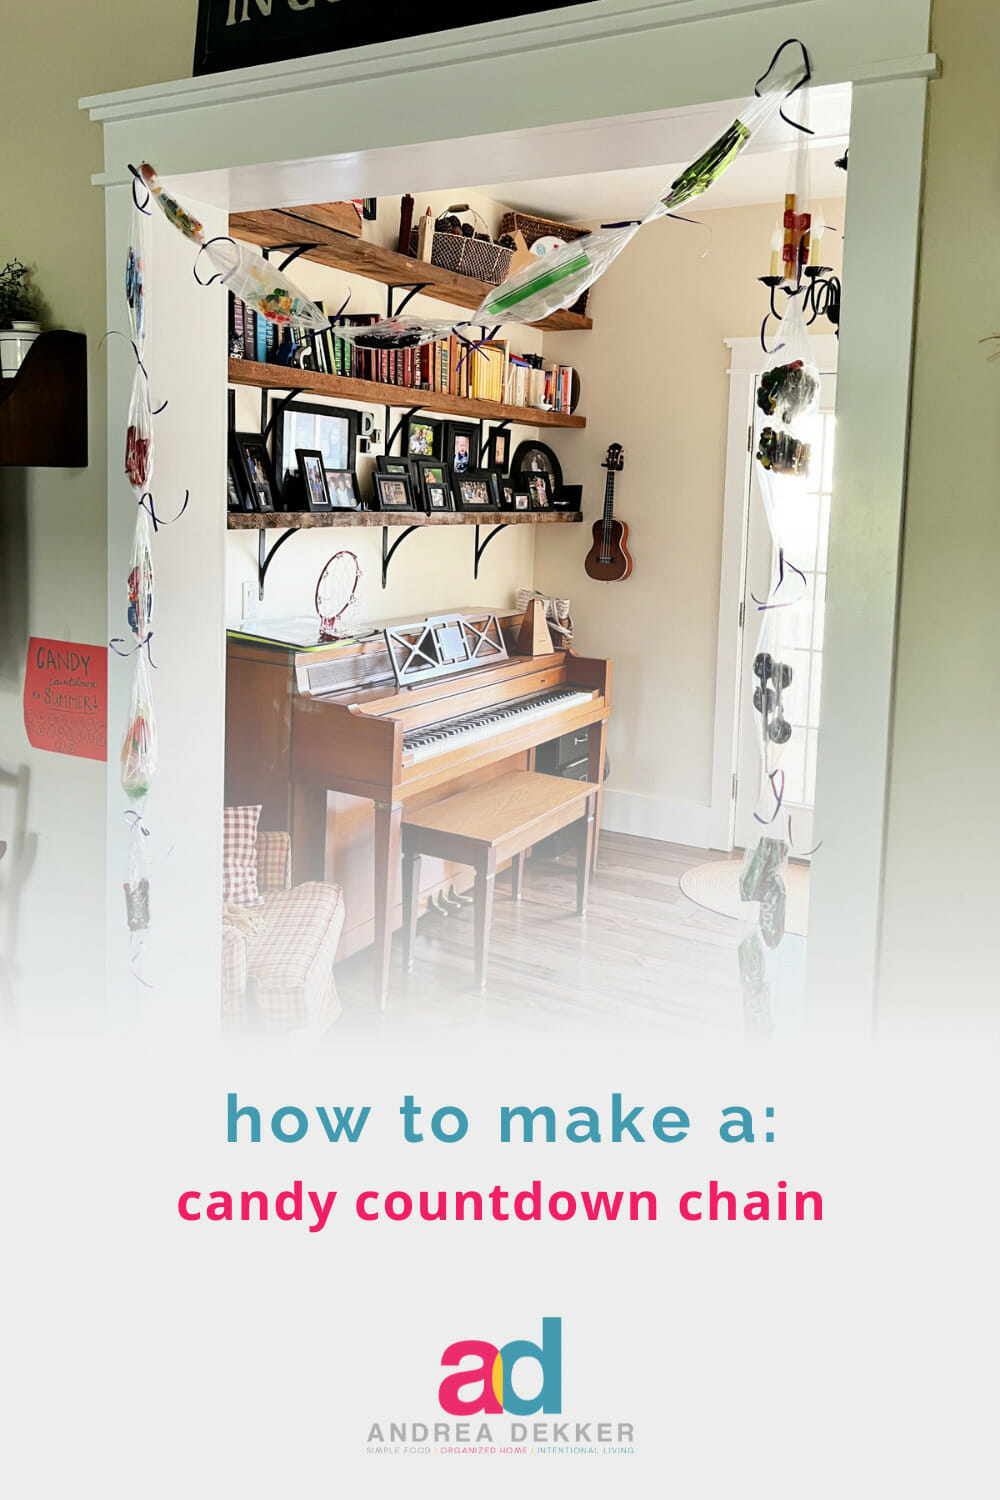 Swap out the traditional construction paper countdown chain for a super fun, super easy CANDY countdown chain and bring a whole new level of excitement to your home! via @andreadekker